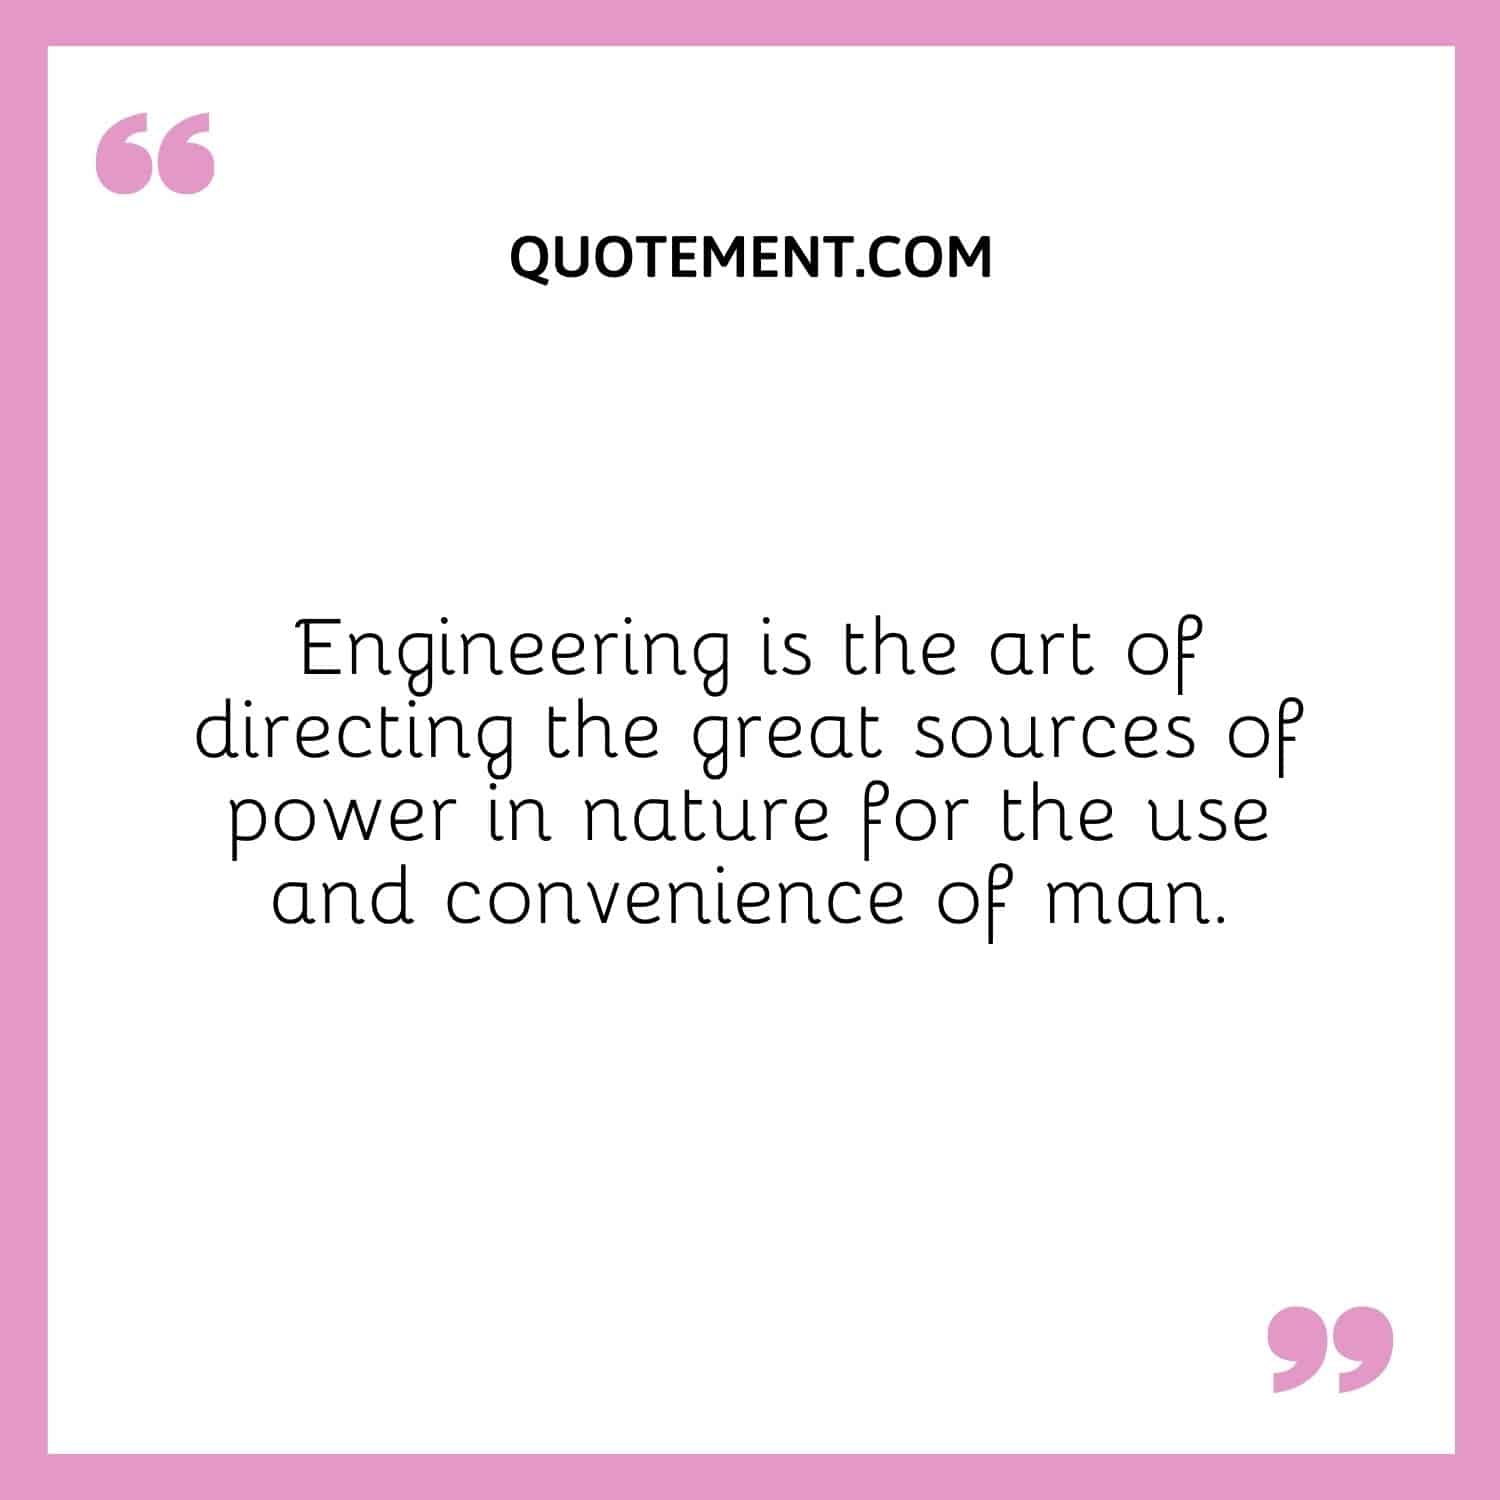 Engineering is the art of directing the great sources of power in nature for the use and convenience of man.